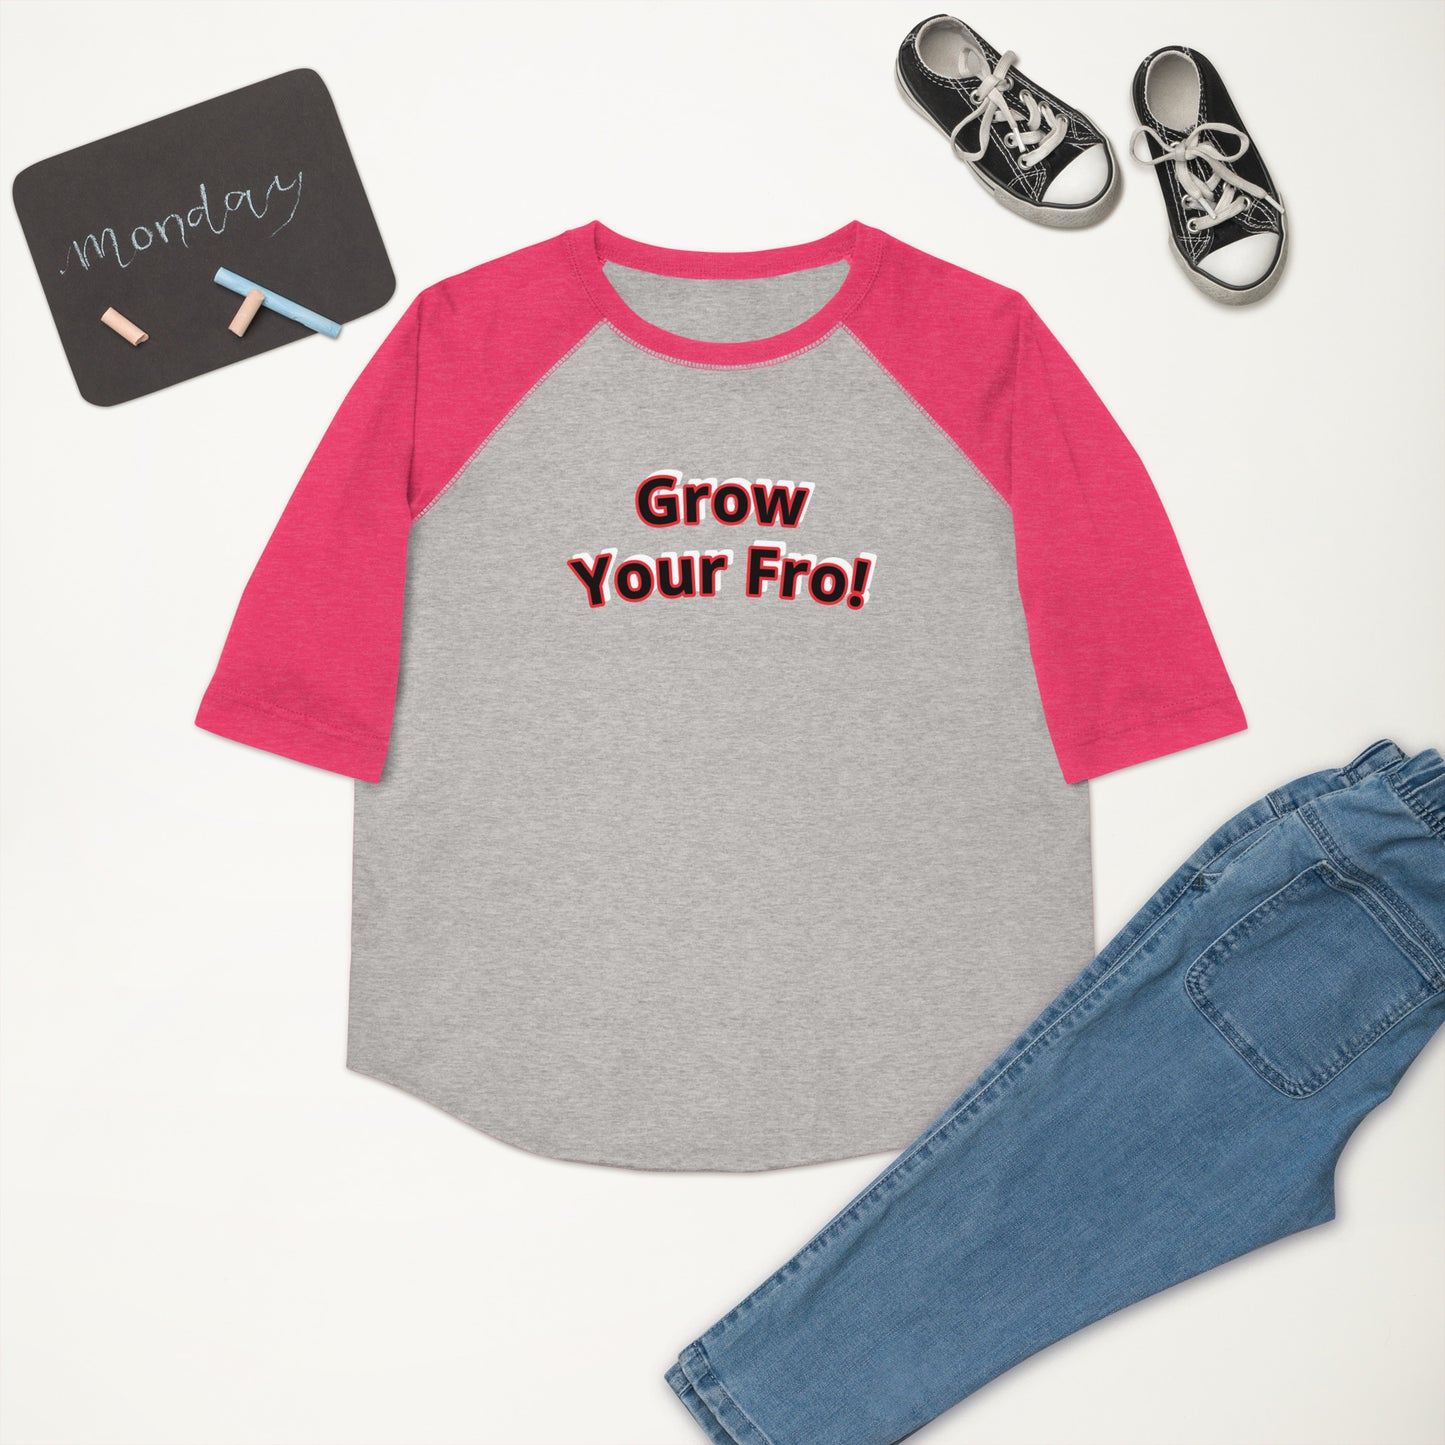 Grow Your Fro! Youth baseball shirt